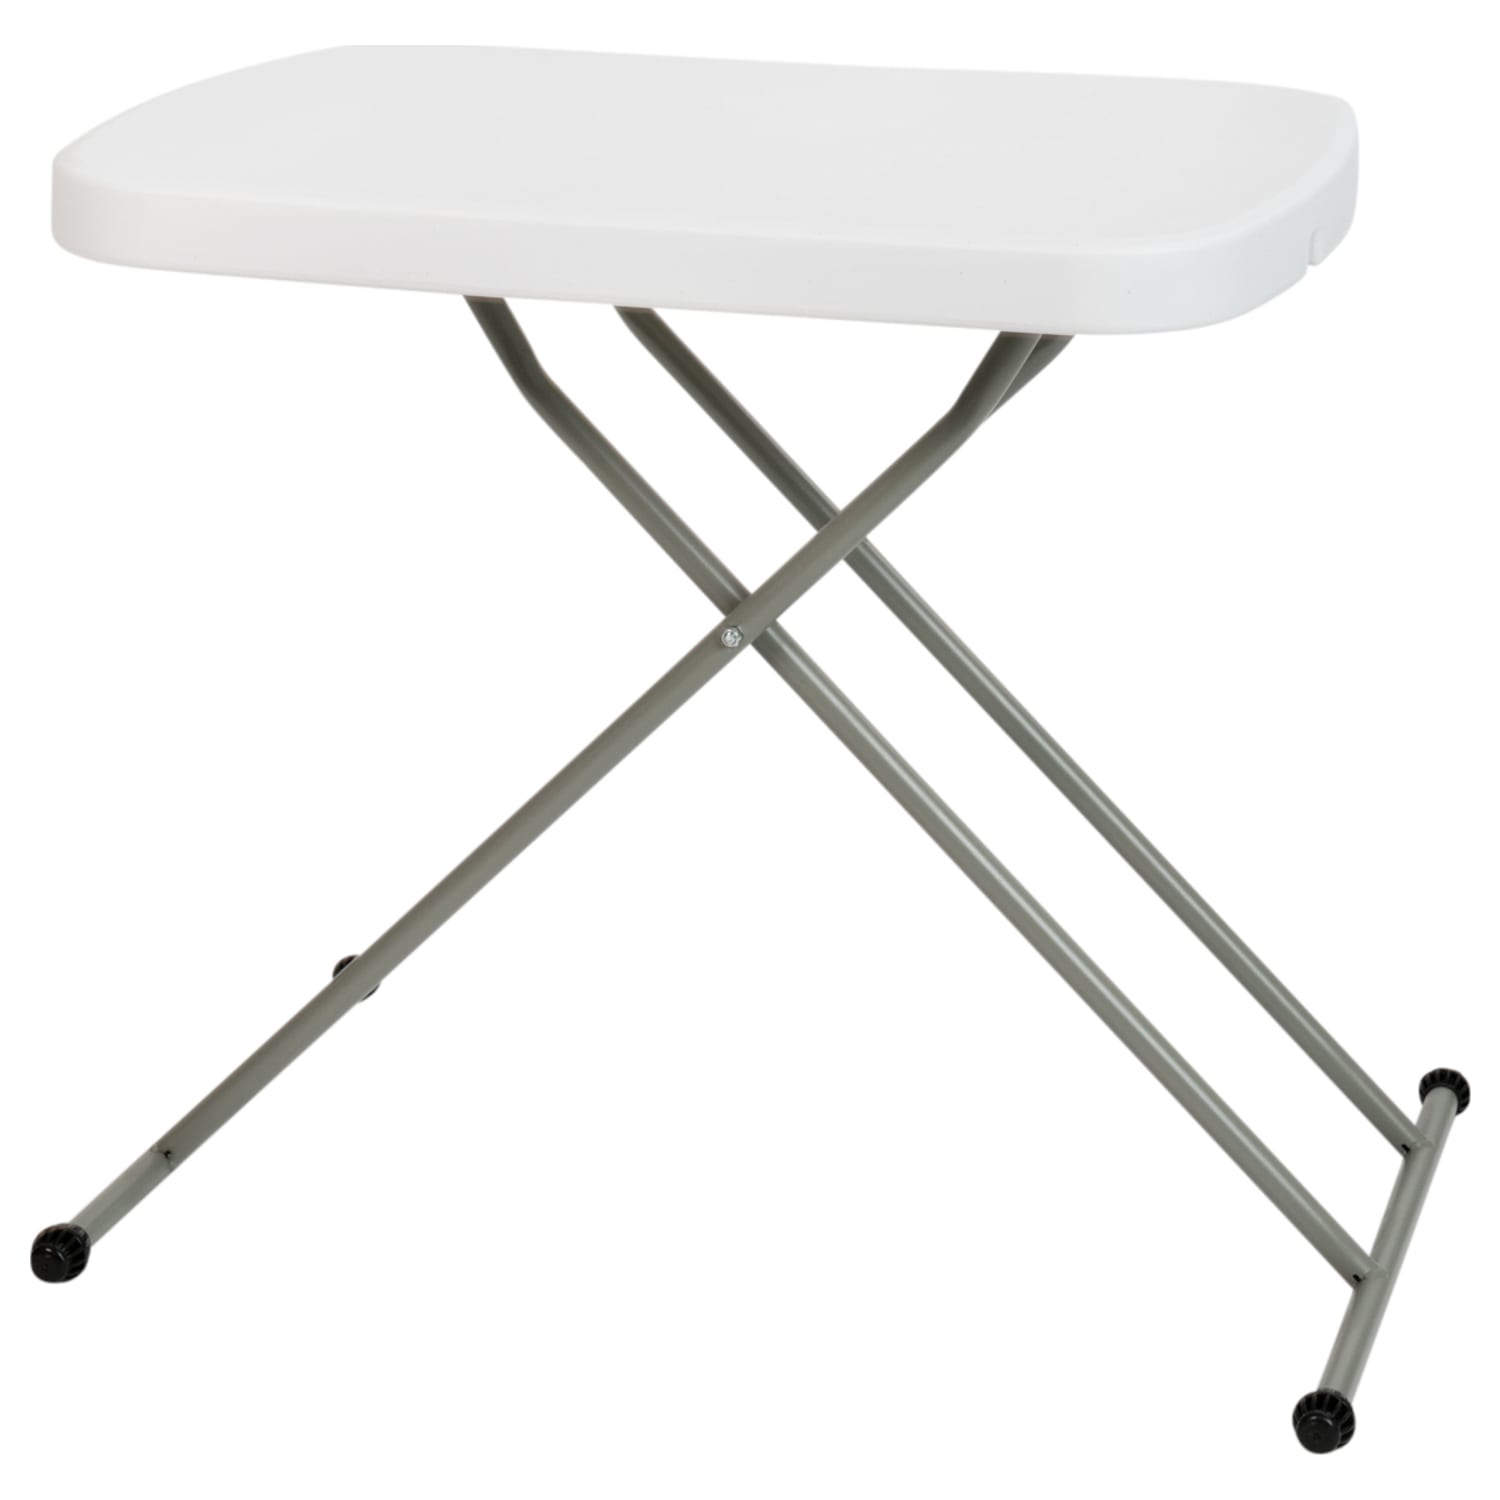 26 Inch Granite White Indoor/Outdoor Plastic Folding Table, Adjustable Height Commercial Grade Side Table, Laptop Table, TV Tray